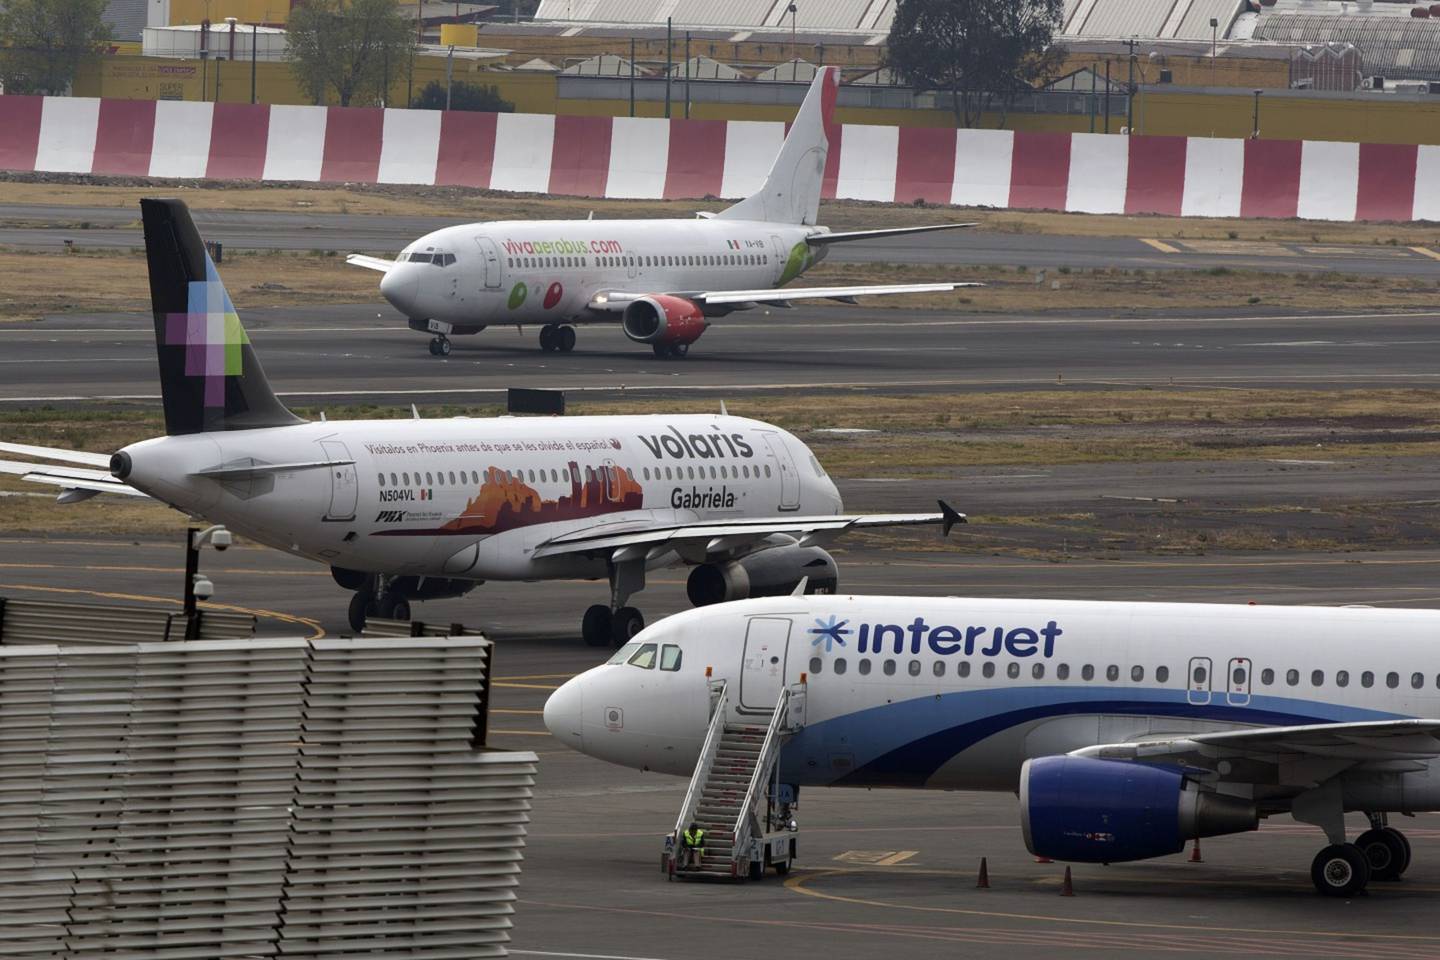 Interjet and Volaris airplanes sit parked on the tarmac while a Grupo Viva Aerobus SAB airplane prepares to take off at Benito Juarez International Airport (AICM) in Mexico City, Mexico, on Thursday, Jan. 16, 2014. Grupo Viva Aerobus SAB filed for what would be Mexico's second initial public offering of shares by an airline since September as passenger traffic sets annual records. Interjet, Mexico's second-biggest carrier in 2012, may sell shares this year, Executive President Miguel Aleman Magnani said in November. Photographer: Susana Gonzalez/Bloomberg